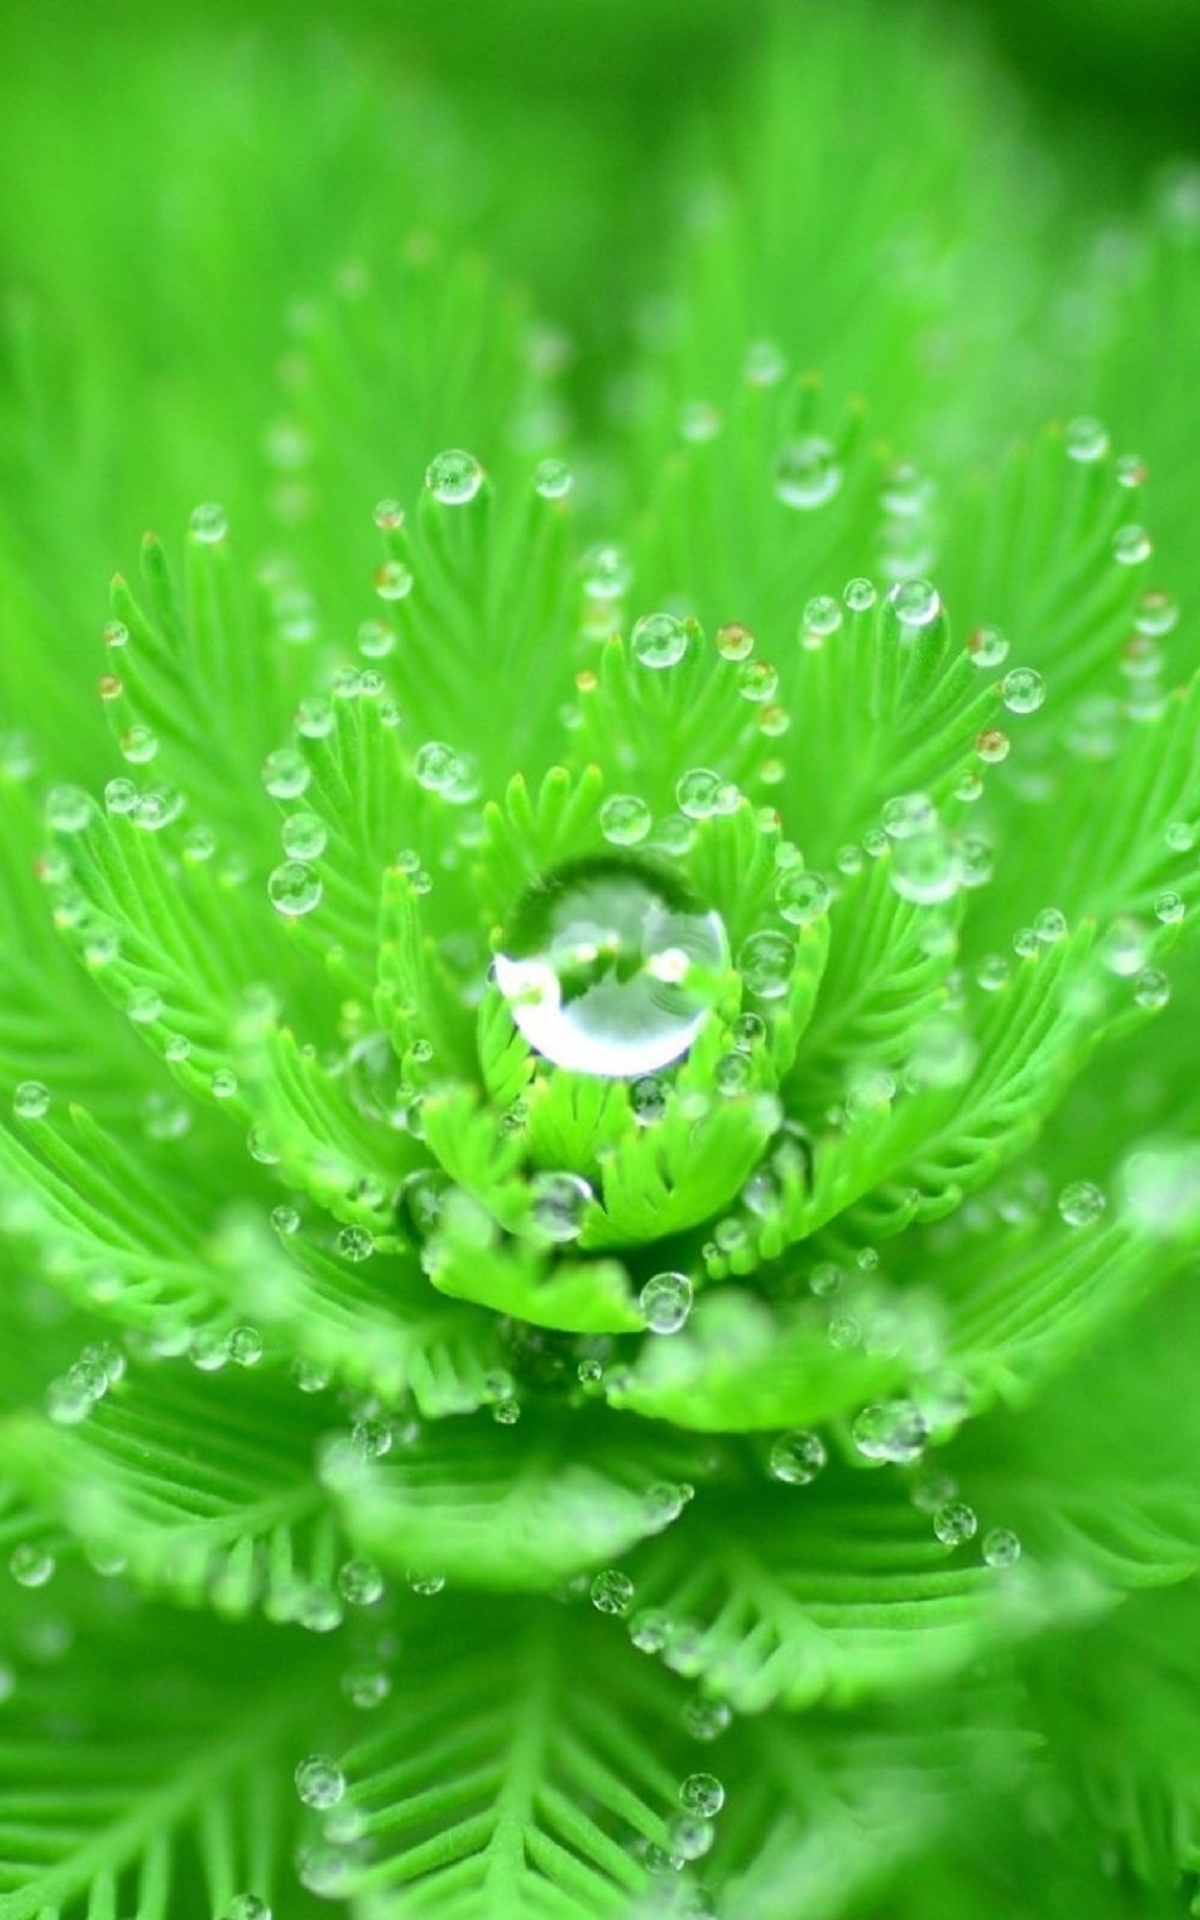 Image: Plant, green, leaves, drops, dew, water, form